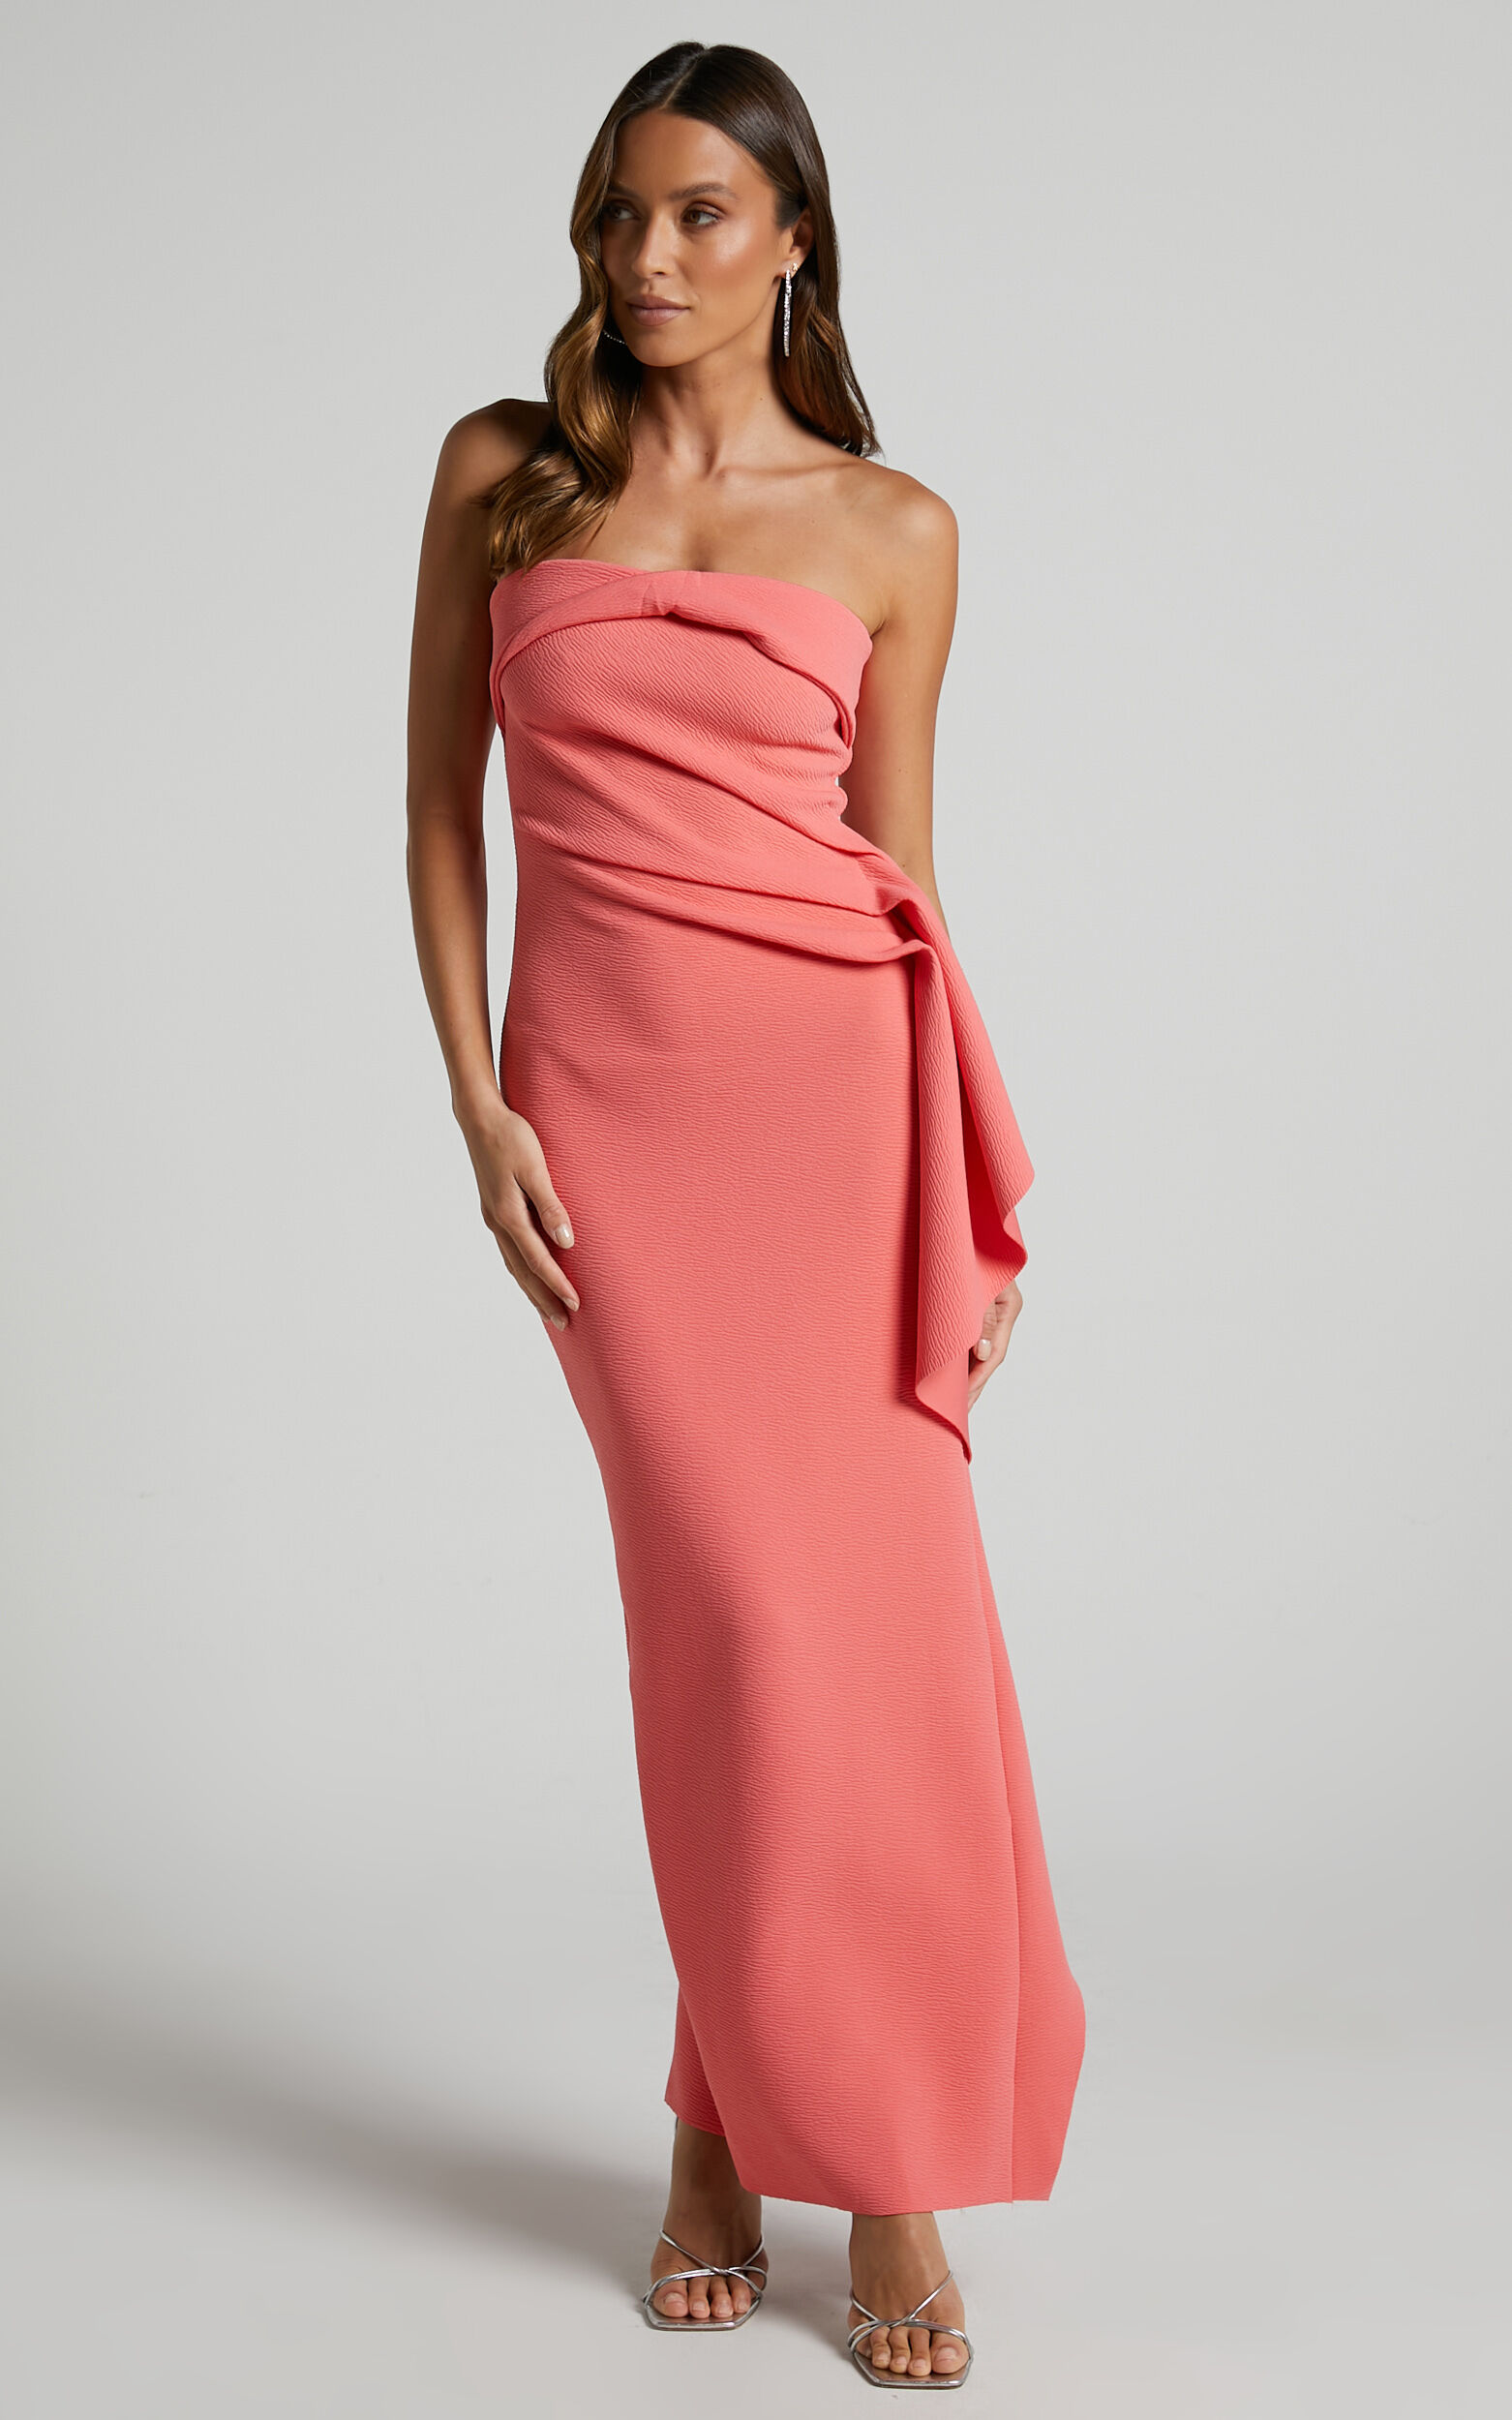 Lana Twist Bust Strapless Gathered Frill Midi Dress in Watermelon - 06, PNK1, super-hi-res image number null